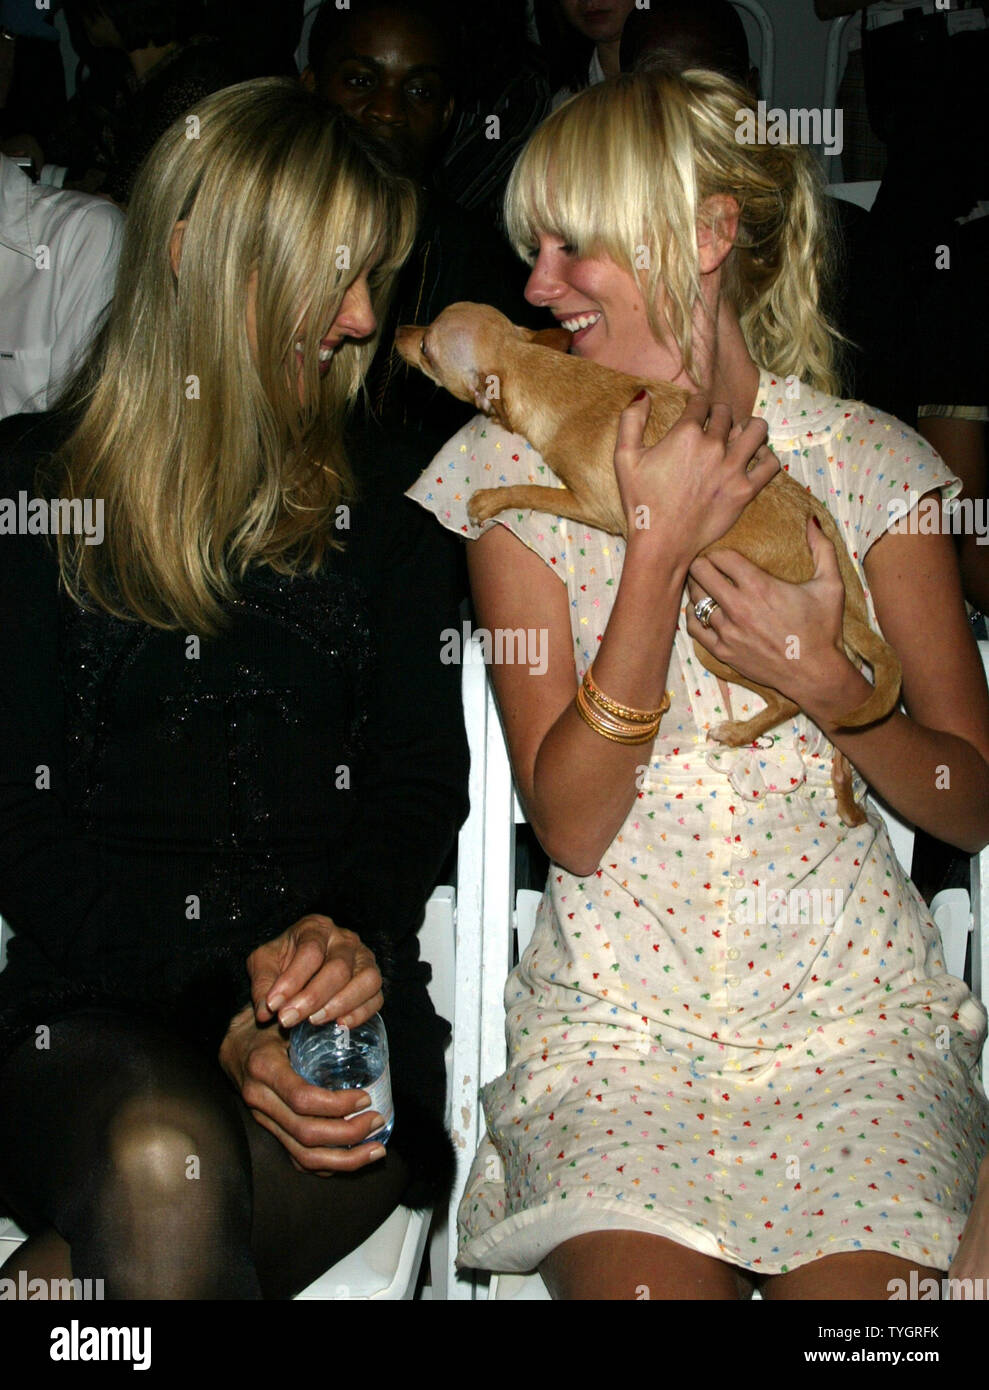 Kimberly Stewart cuddles with 'Prudence' (a friend's dog) as her mother Alana Stewart looks on at the Zang Toi Fashion Show at Bryant Park in New York on September11, 2004.  (UPI Photo/Laura Cavanaugh) Stock Photo